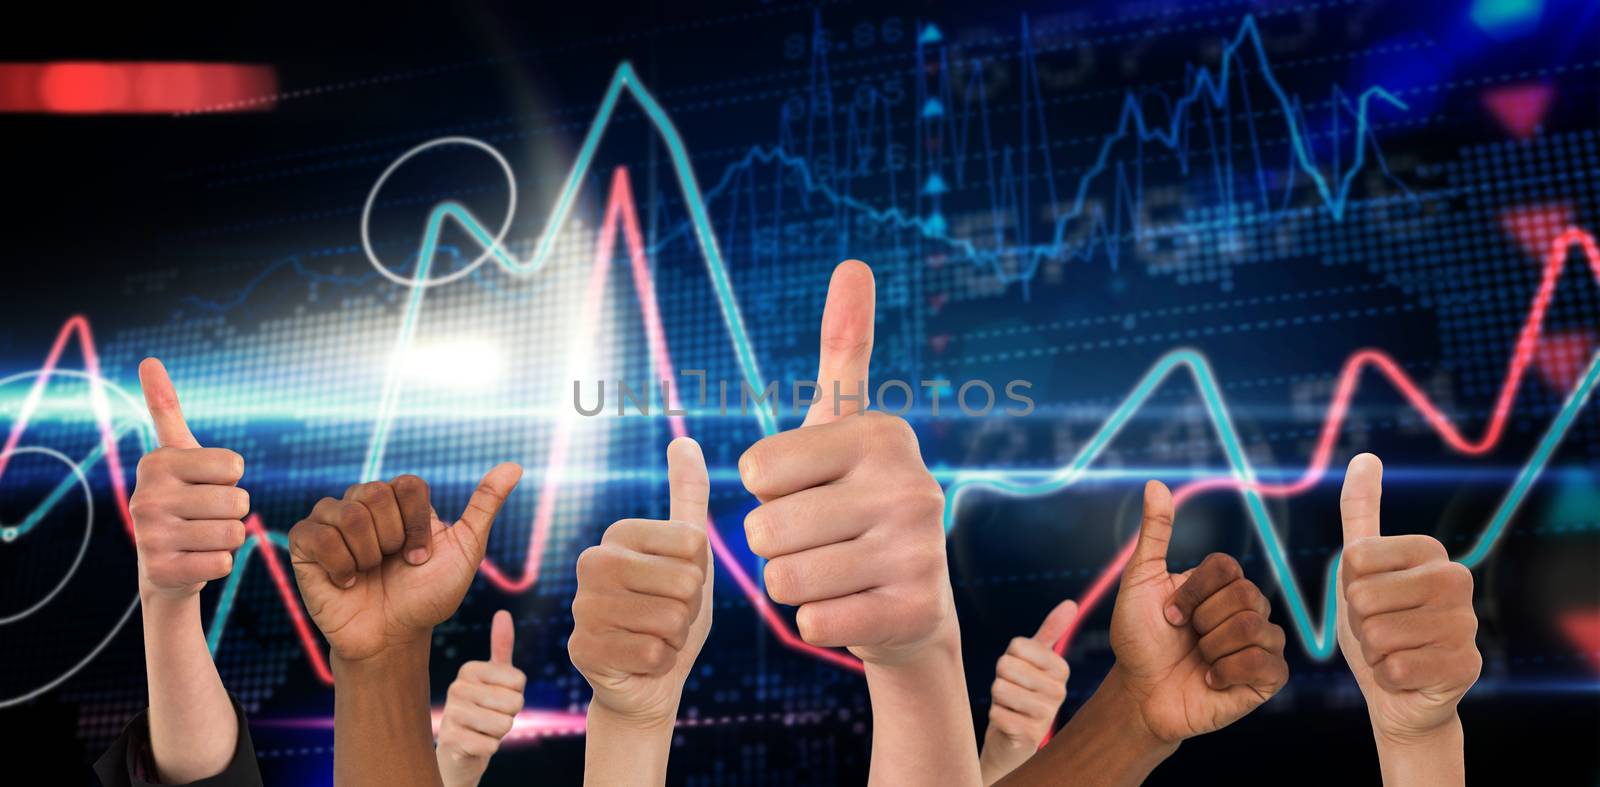 Hands showing thumbs up against stocks and shares on black background